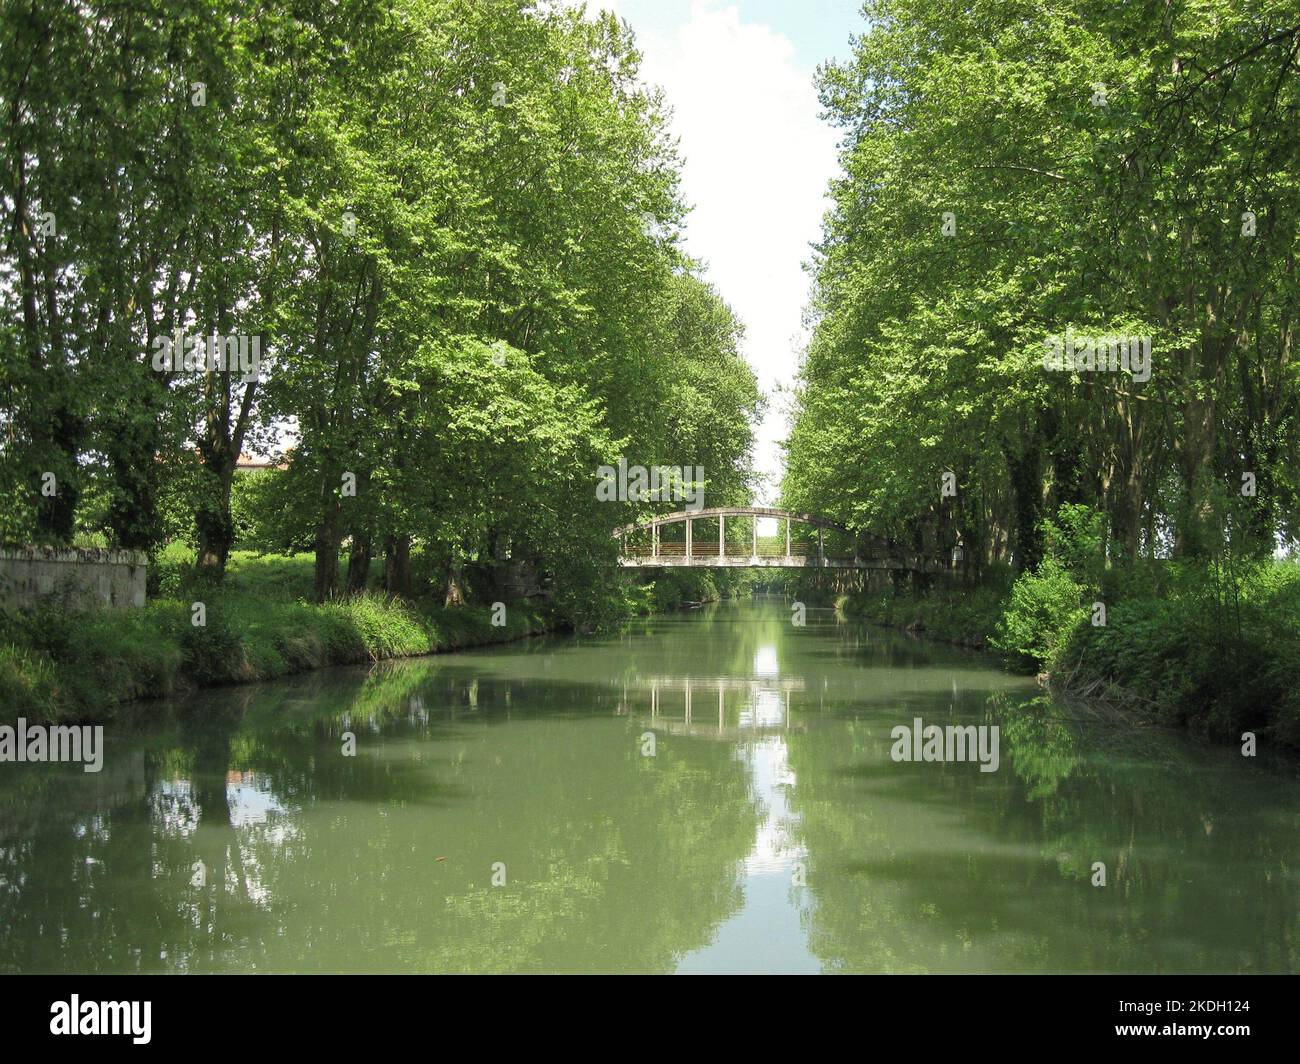 Southern France, side canal of the Garonne river, ( called  Canal lateral a la Garonne ) view of straight canal section with bridges and trees Stock Photo